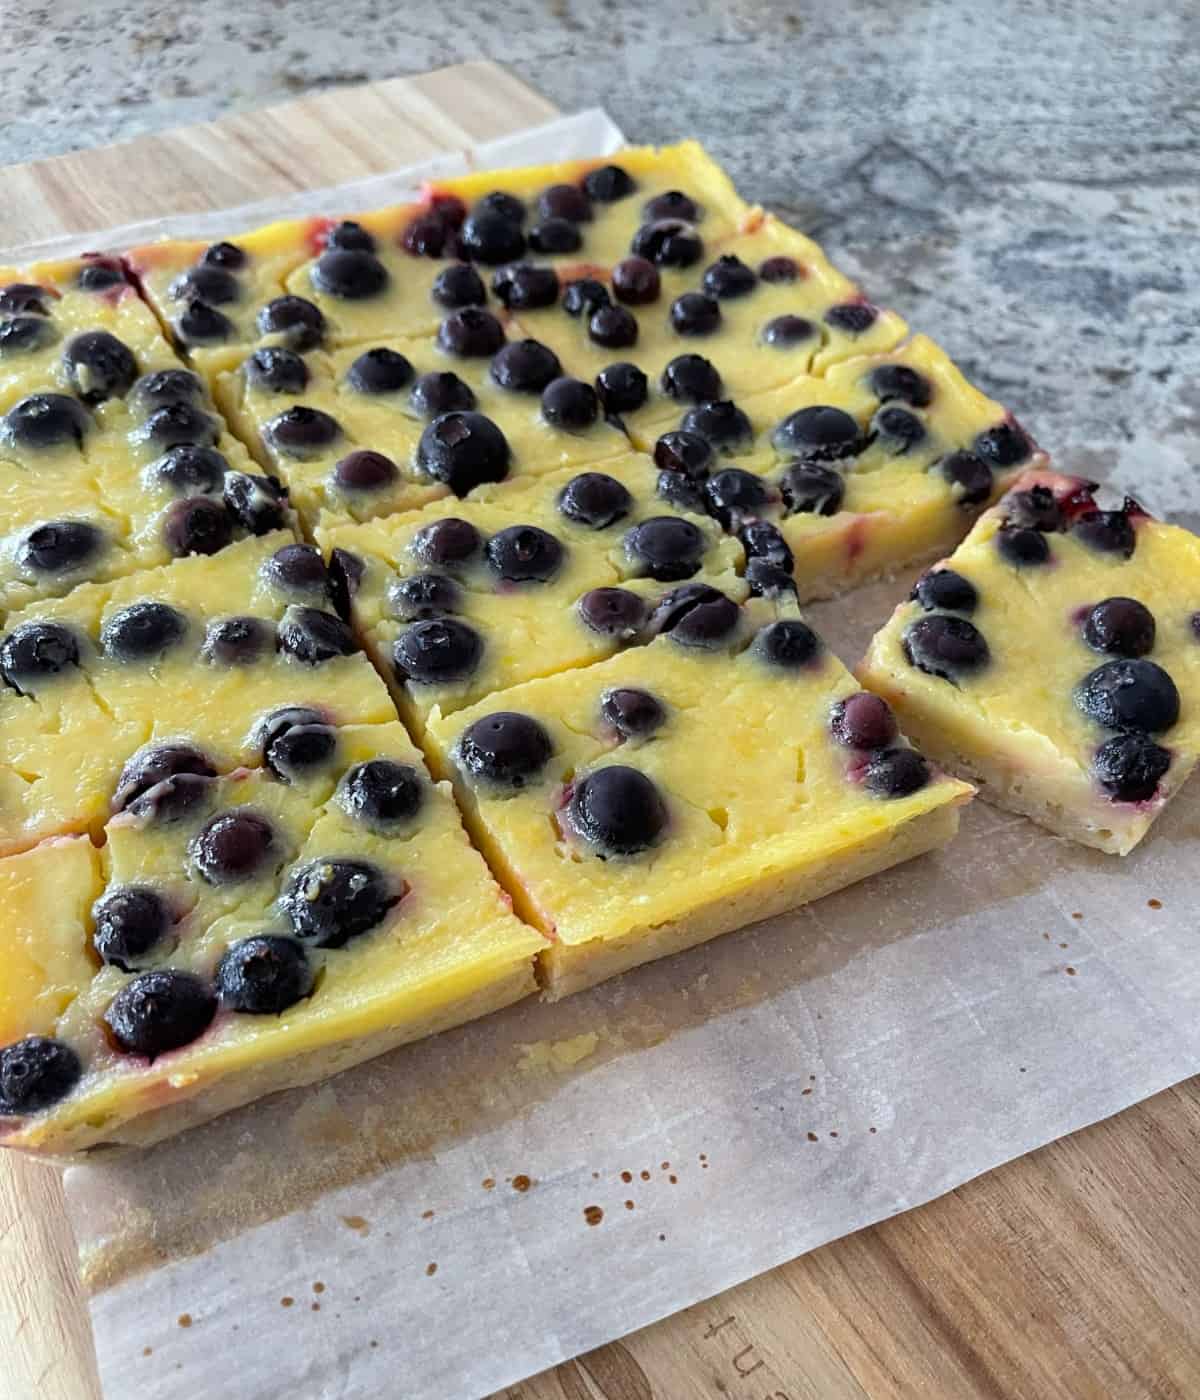 Cut lemon blueberry bars into 12 slices on a wooden cutting board.